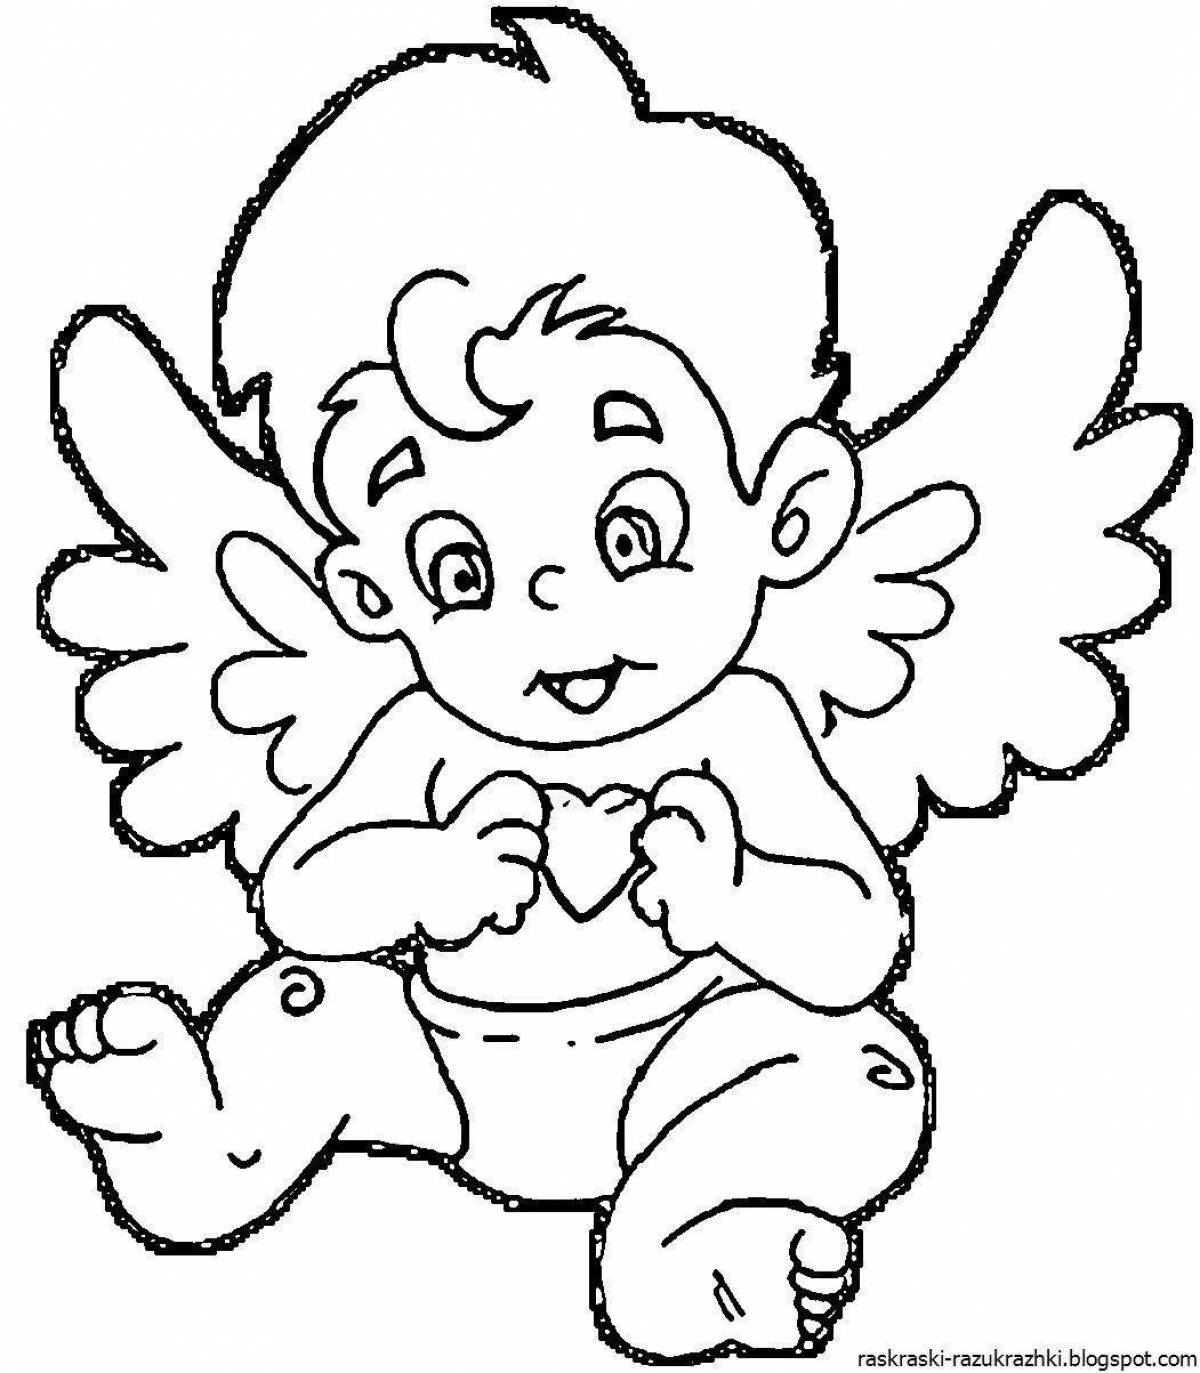 Sky guarded angel coloring book for kids